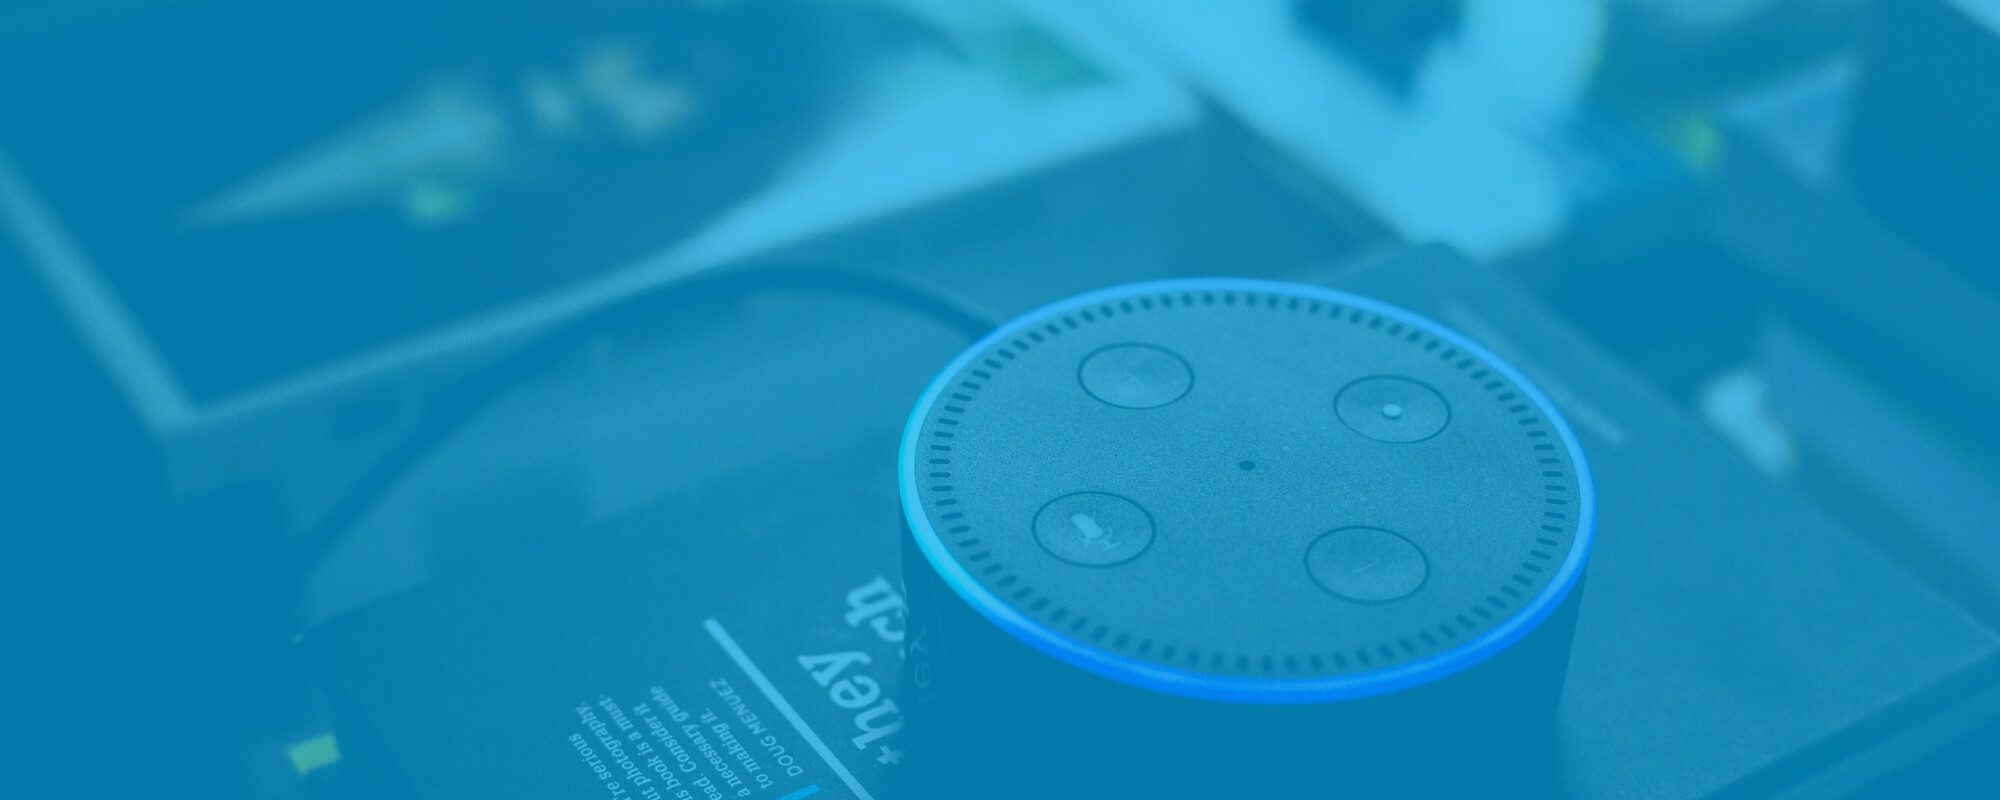 Do Voice Assistants Need To Stay Out Of Events?